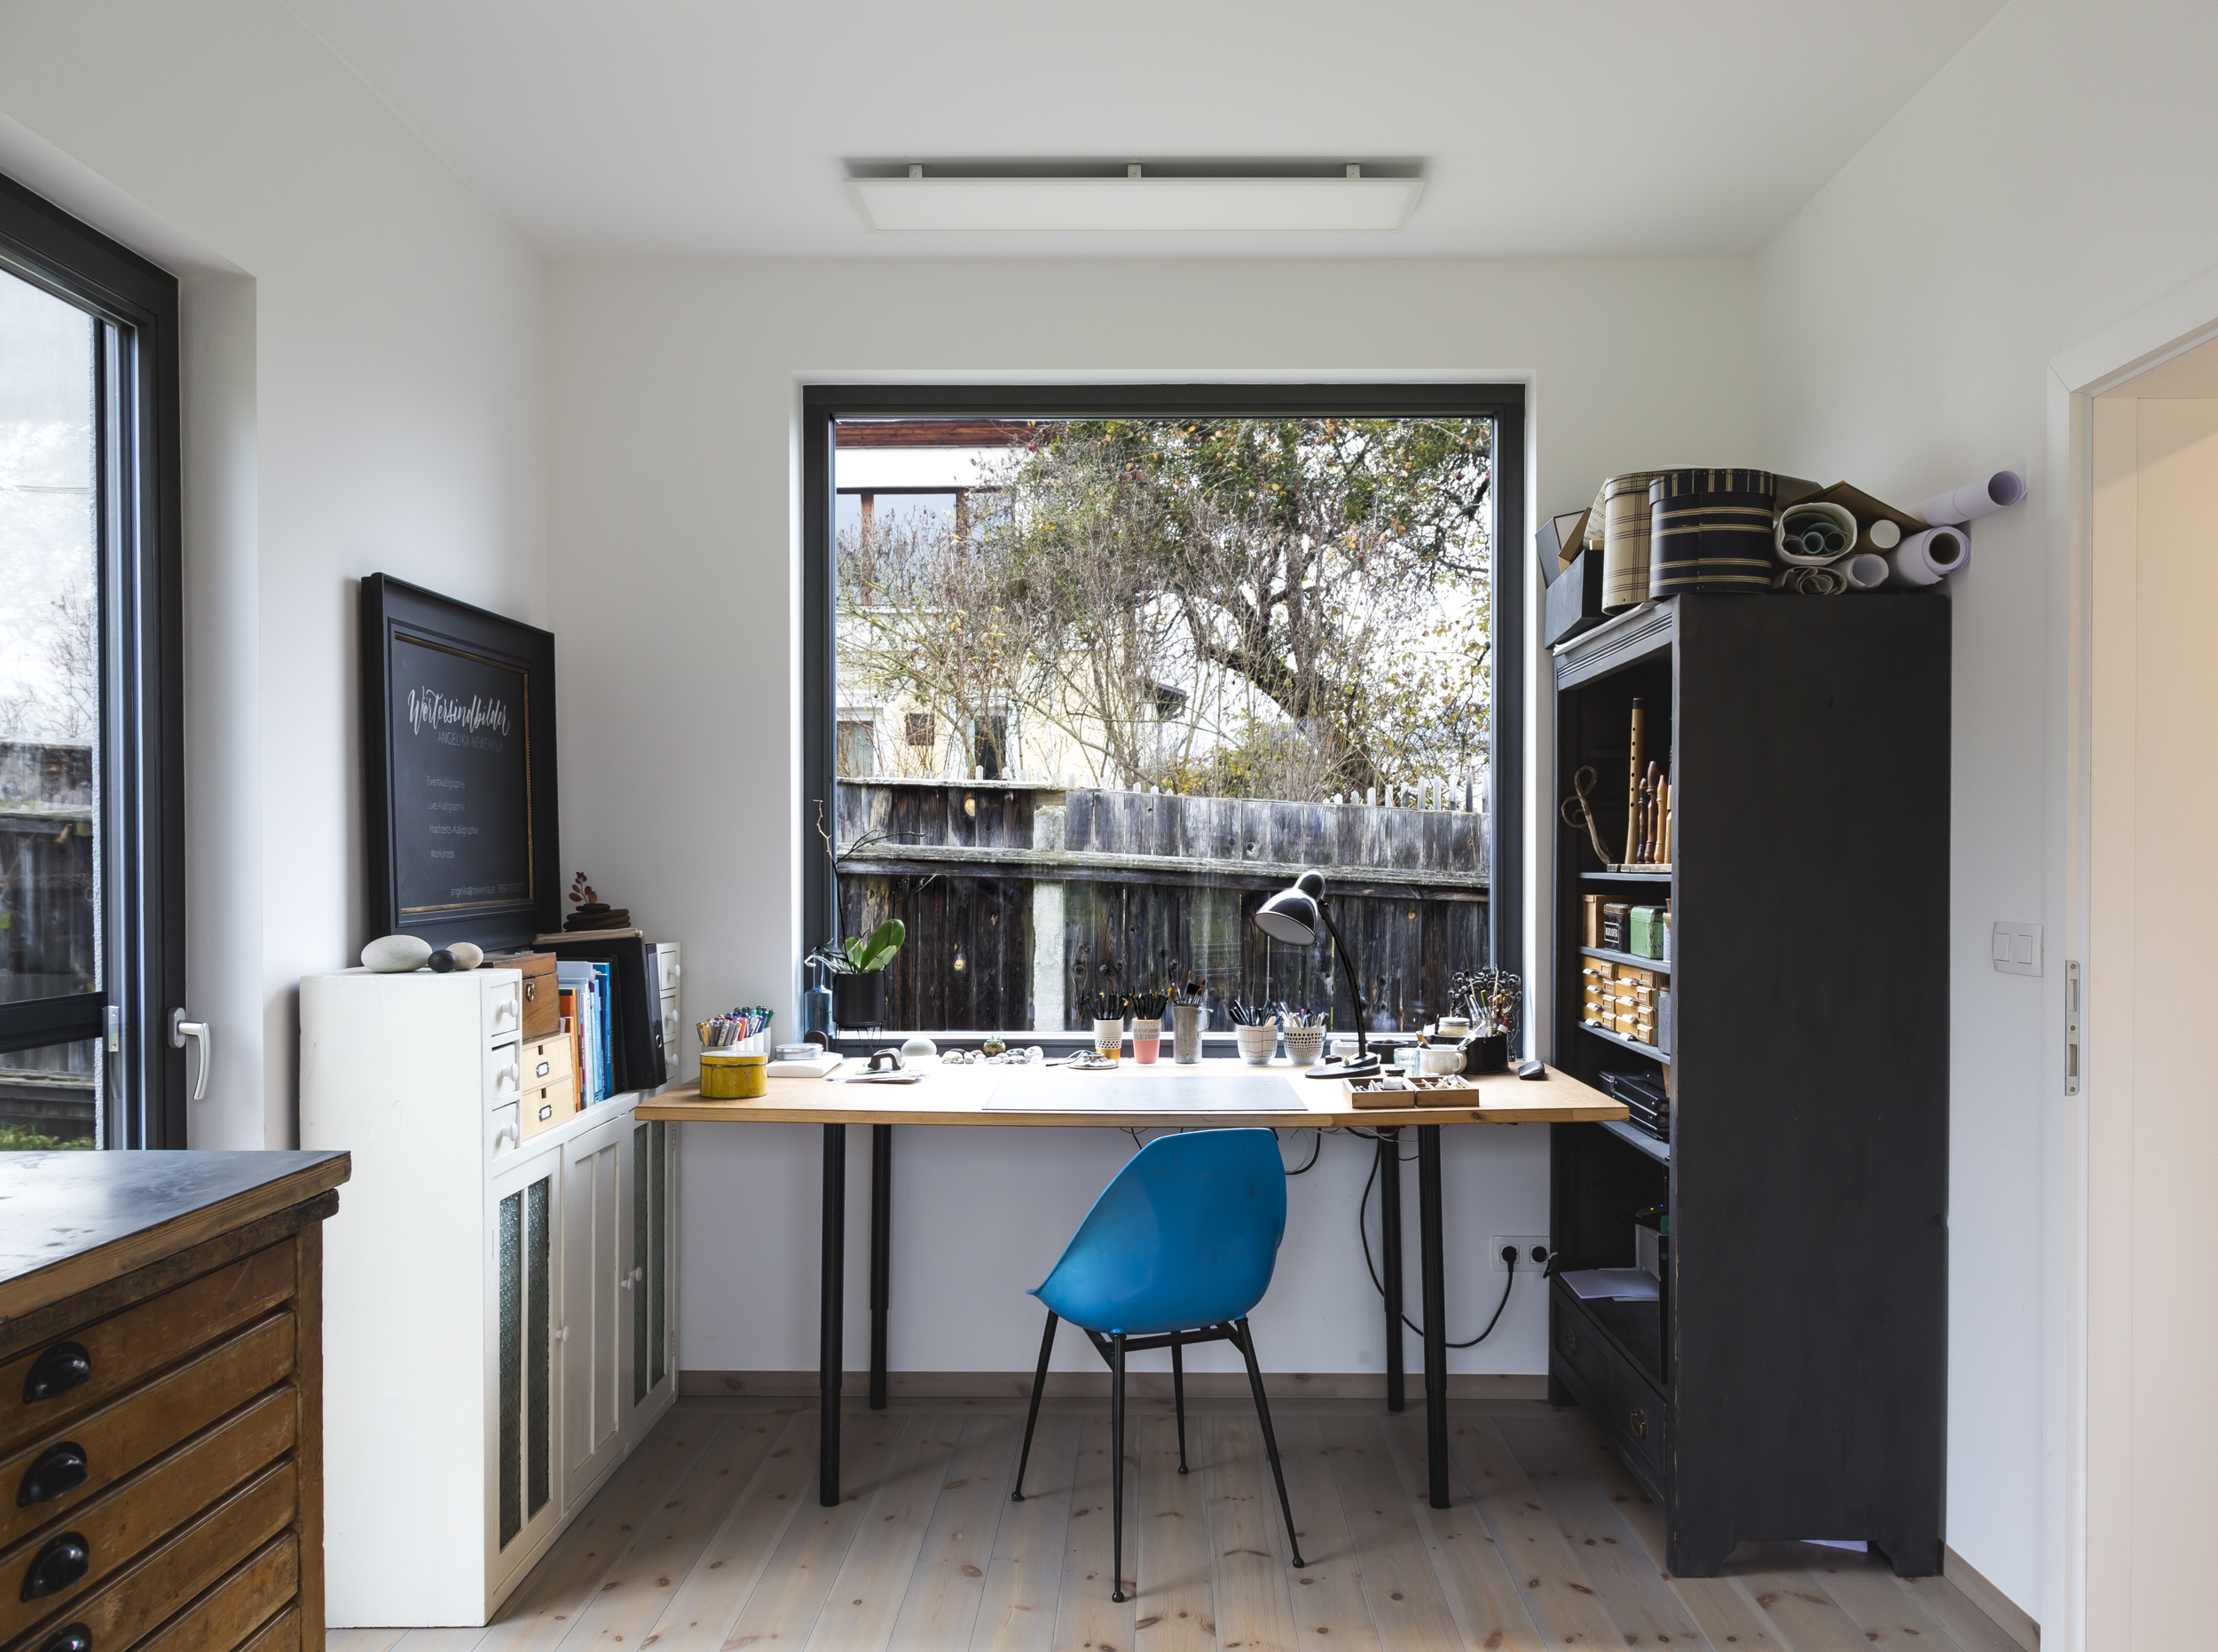 COMMOD home office & garden office